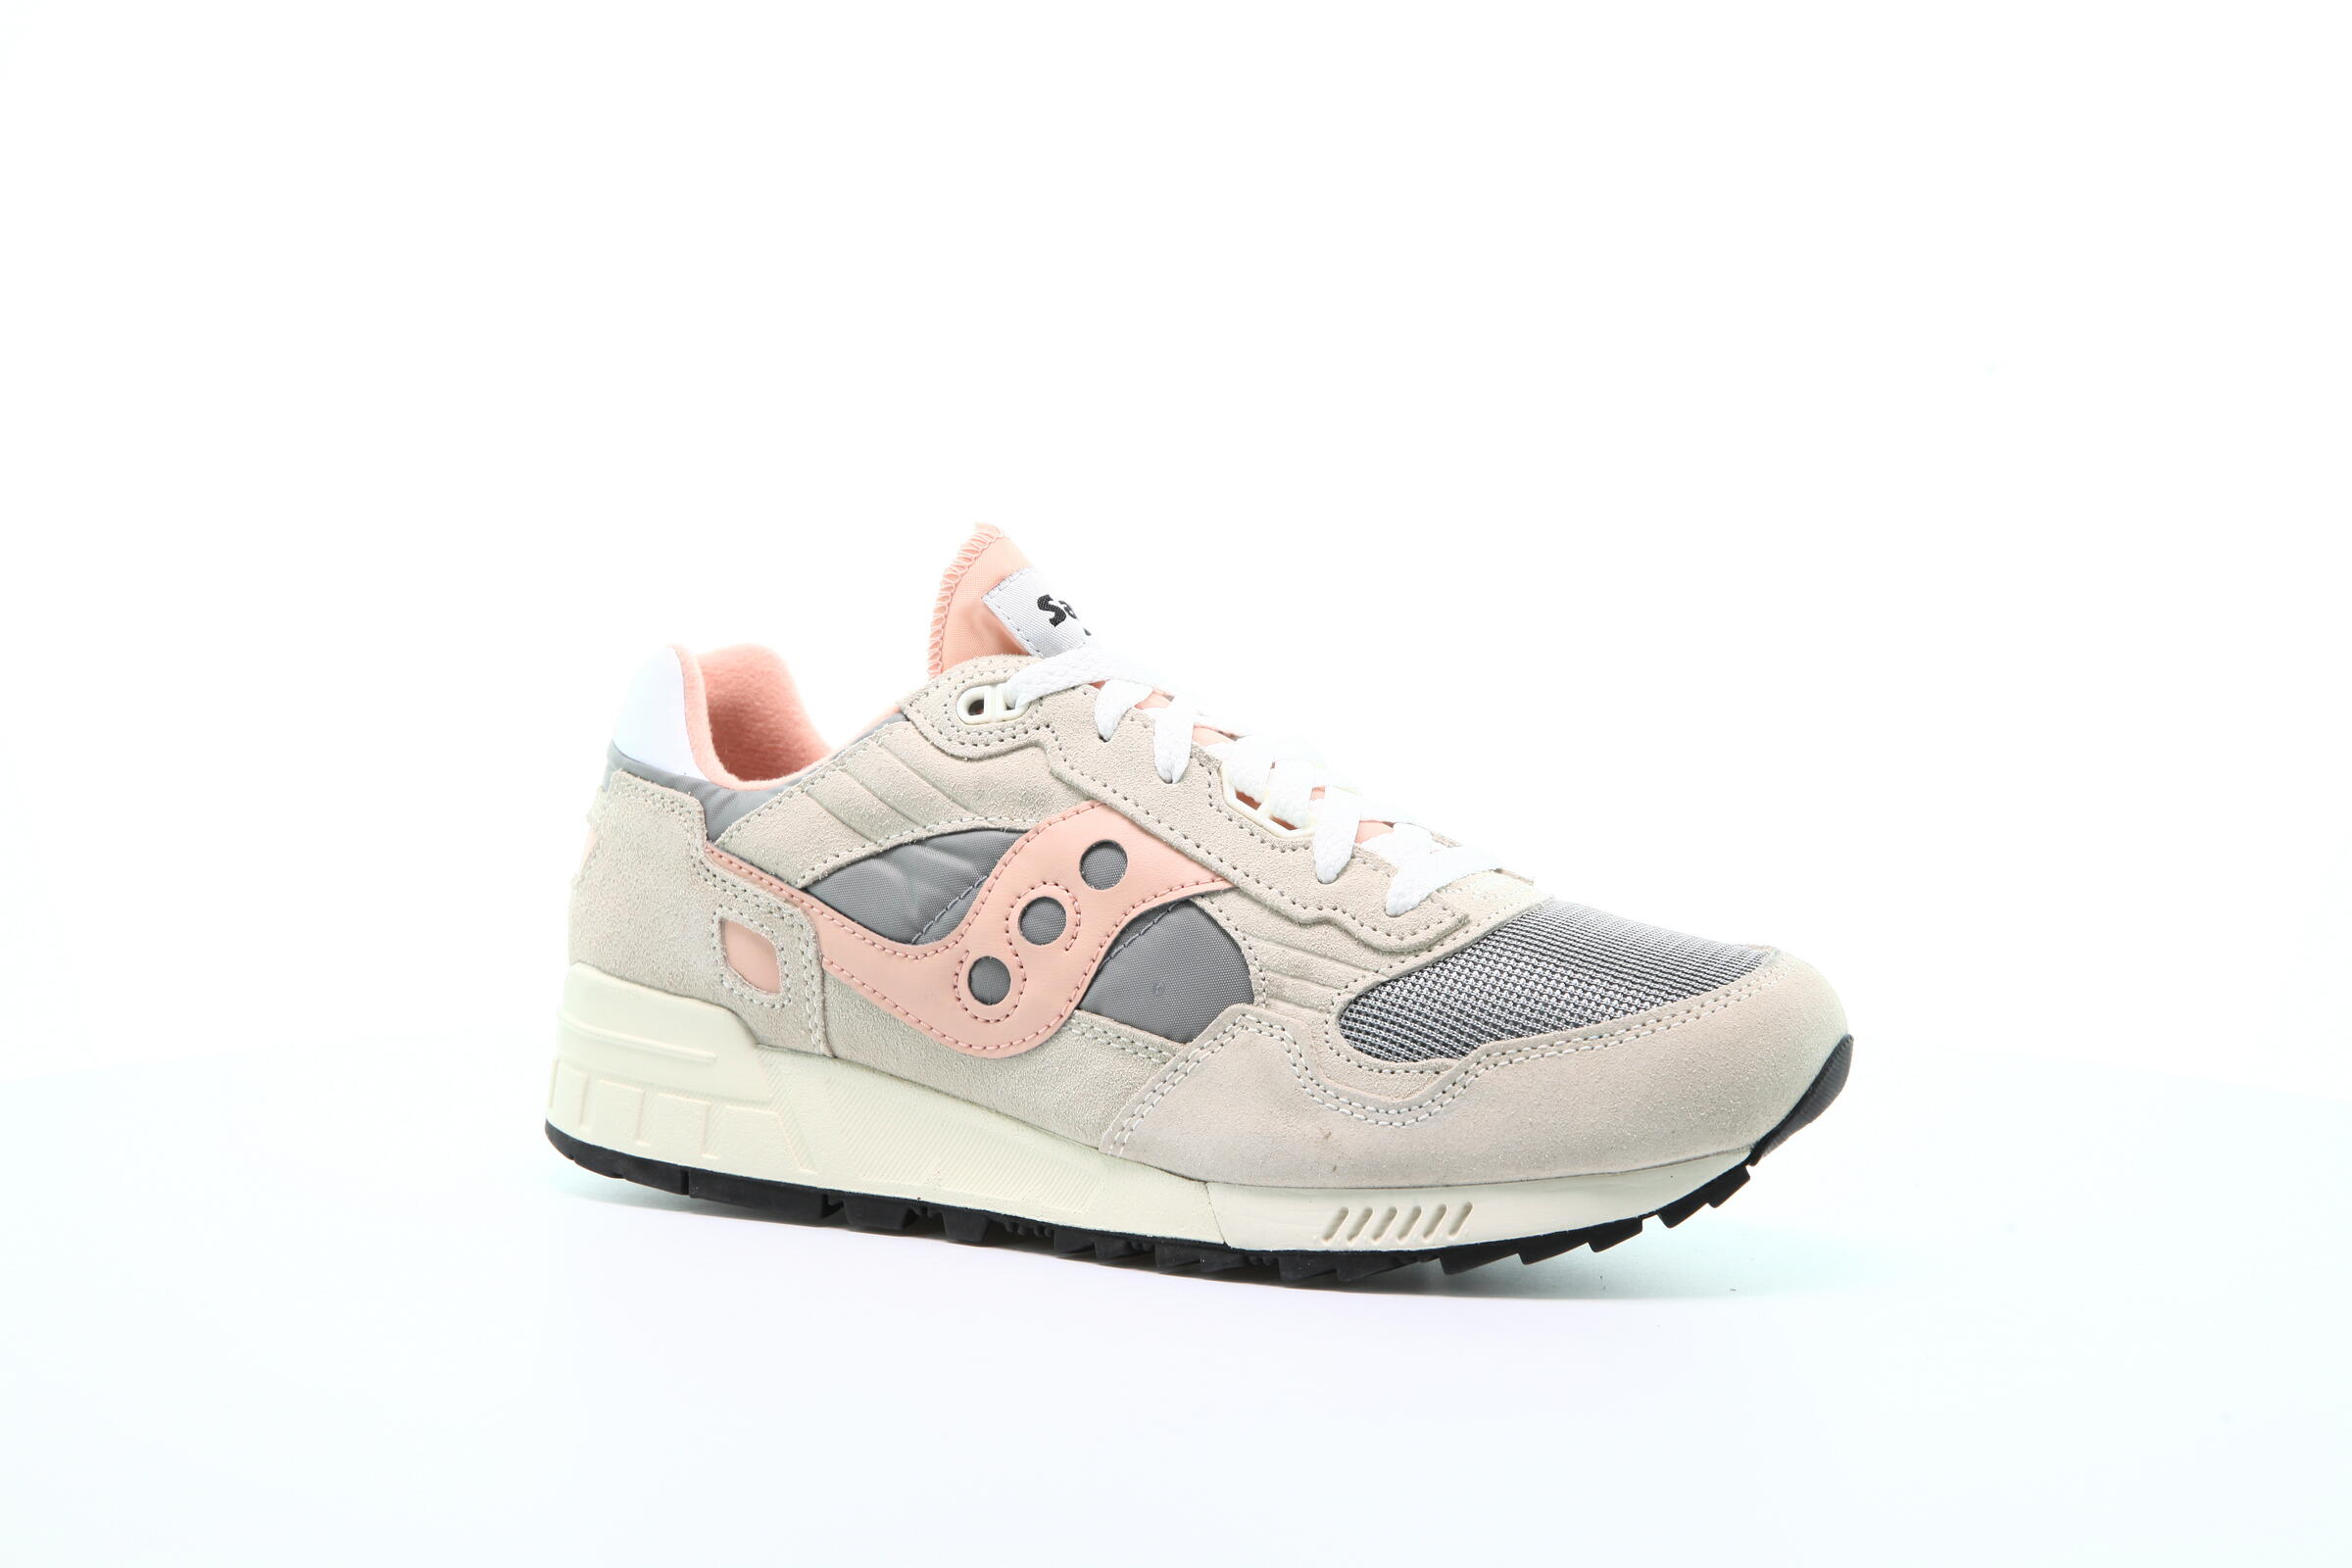 Saucony Shadow 5000 Vintage "Off White"